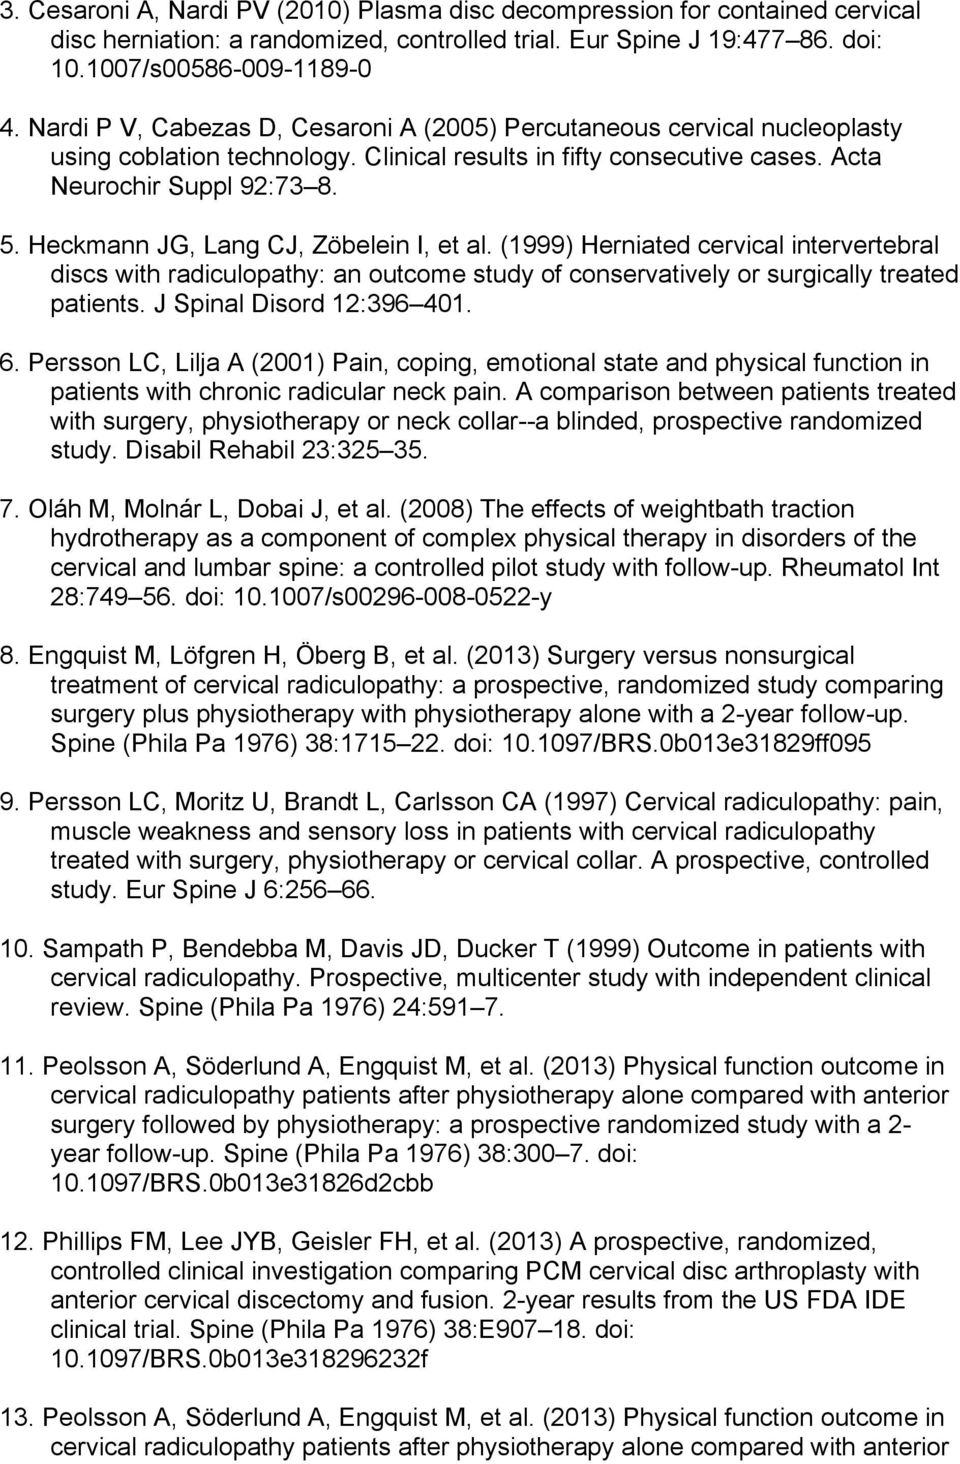 Heckmann JG, Lang CJ, Zöbelein I, et al. (1999) Herniated cervical intervertebral discs with radiculopathy: an outcome study of conservatively or surgically treated patients.